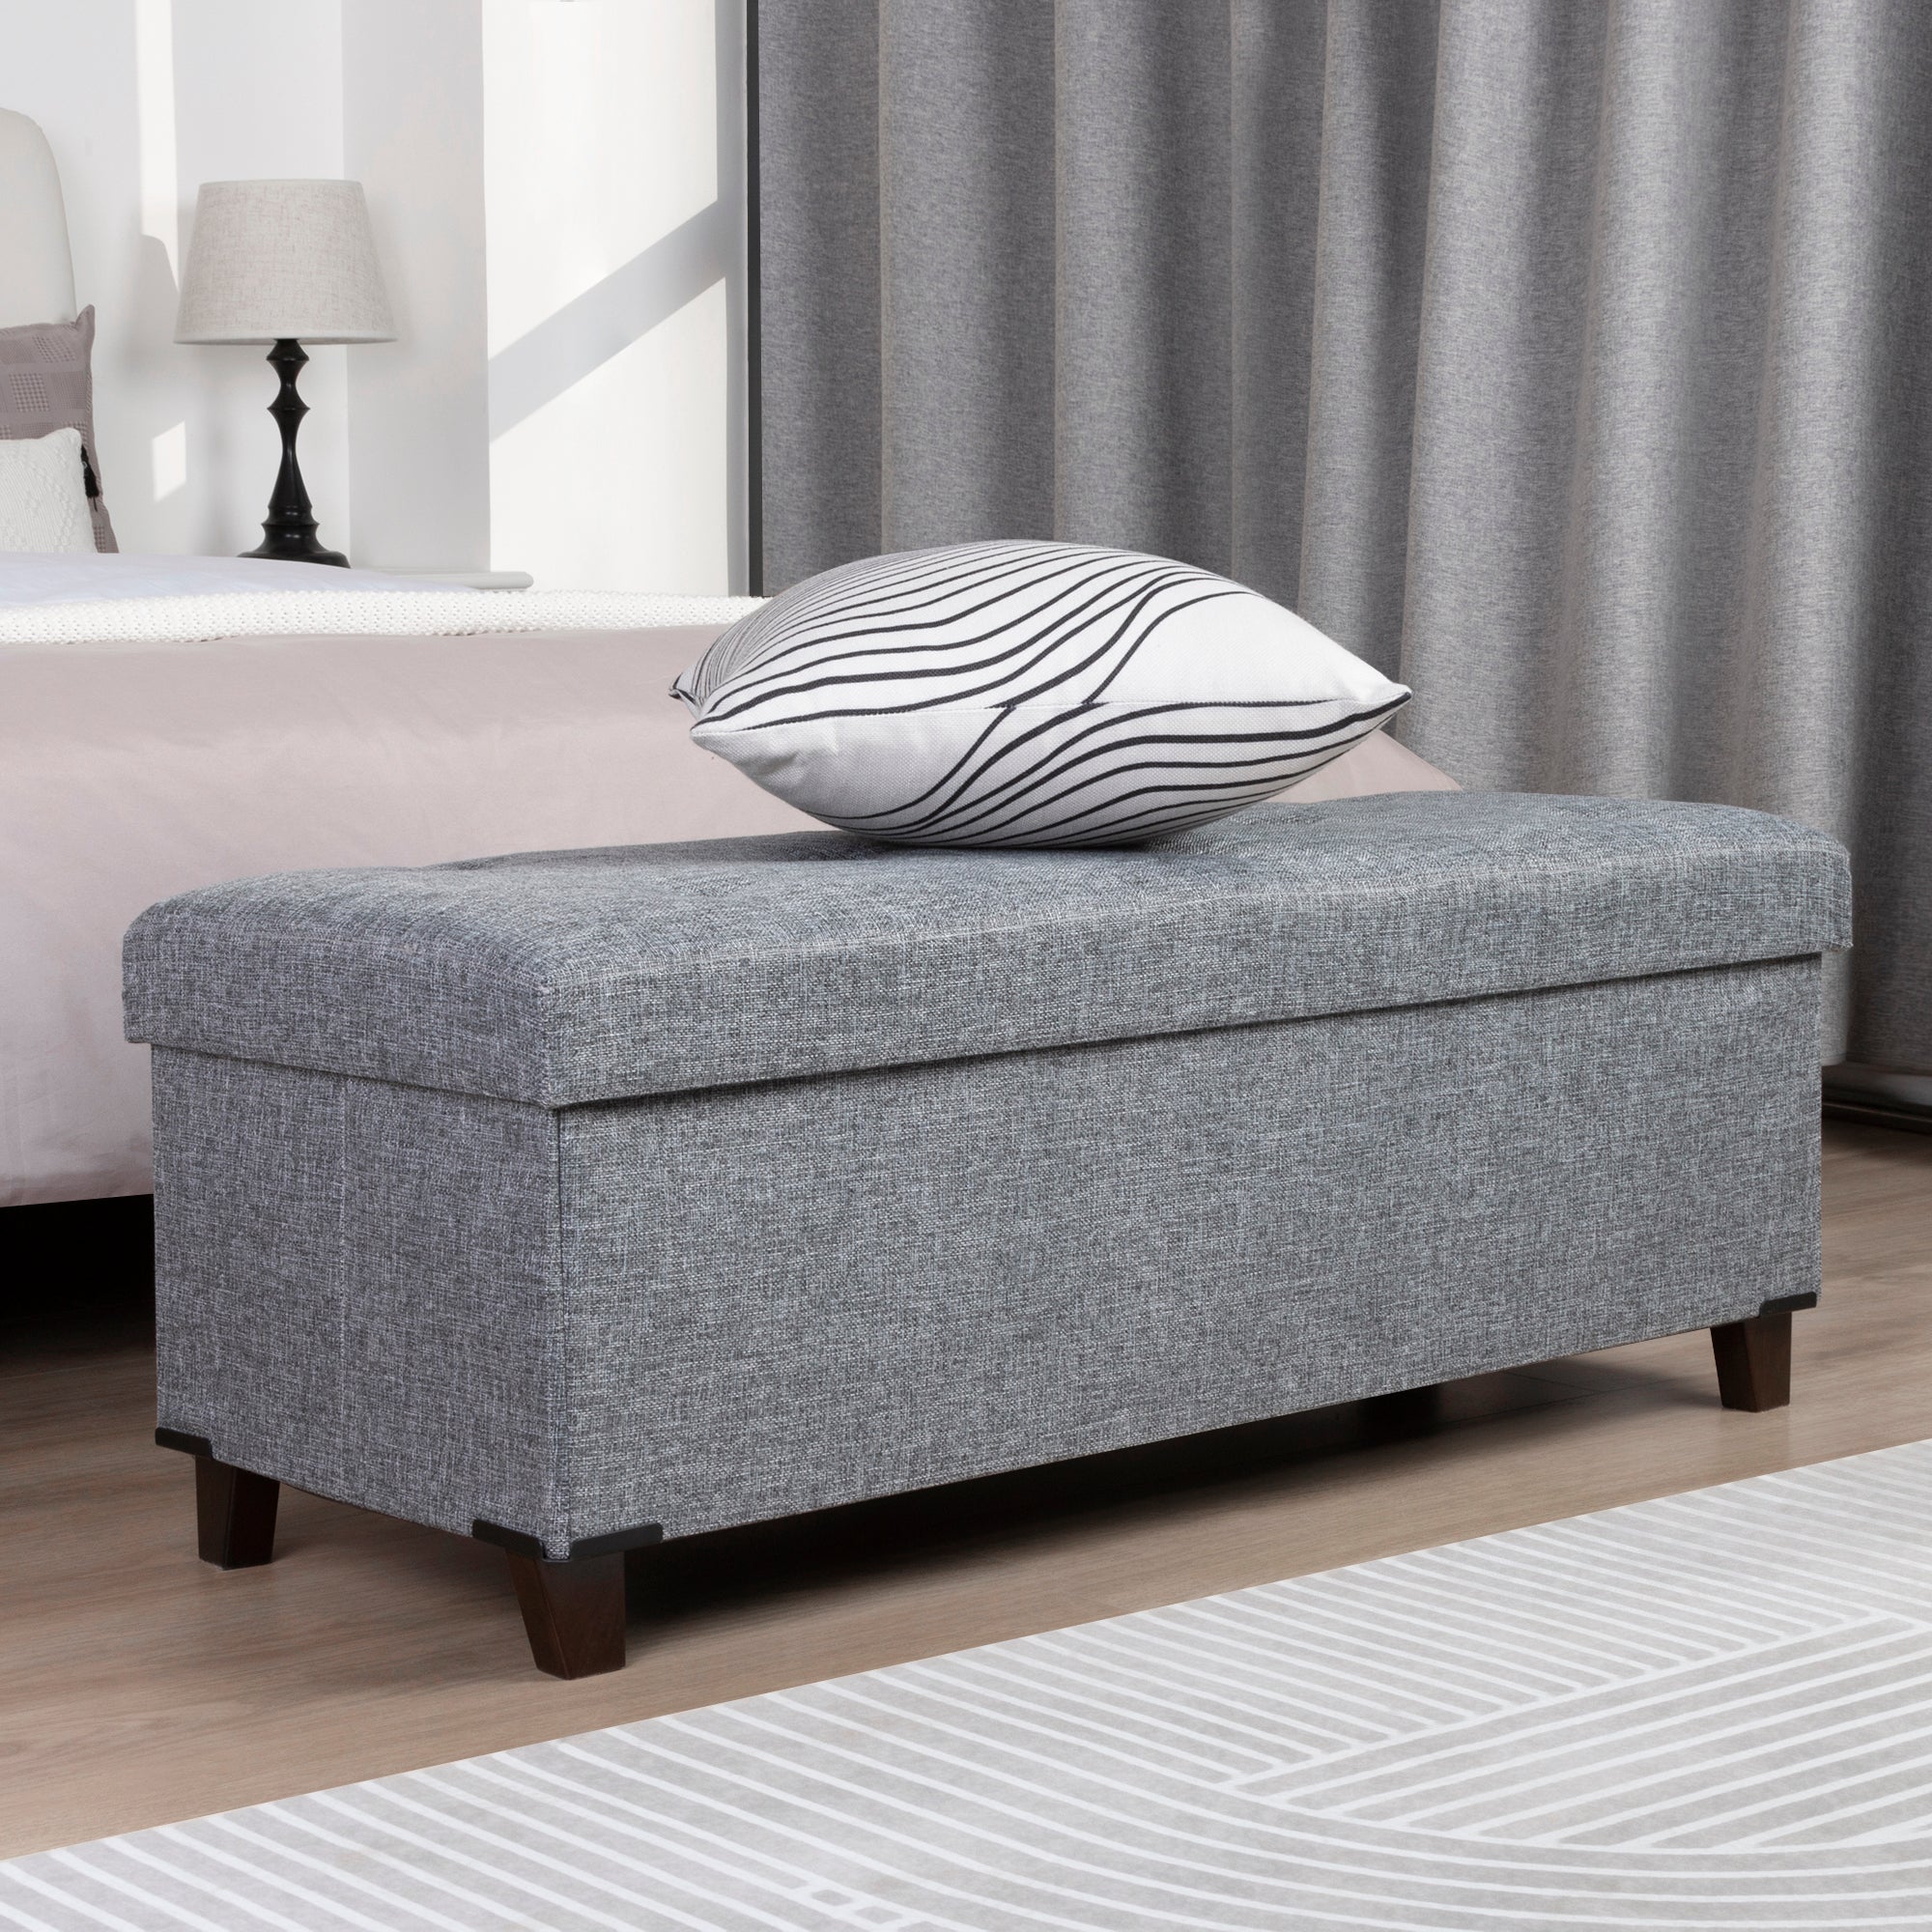 Fabric Storage Ottoman, Bench for Entryway and Bedroom